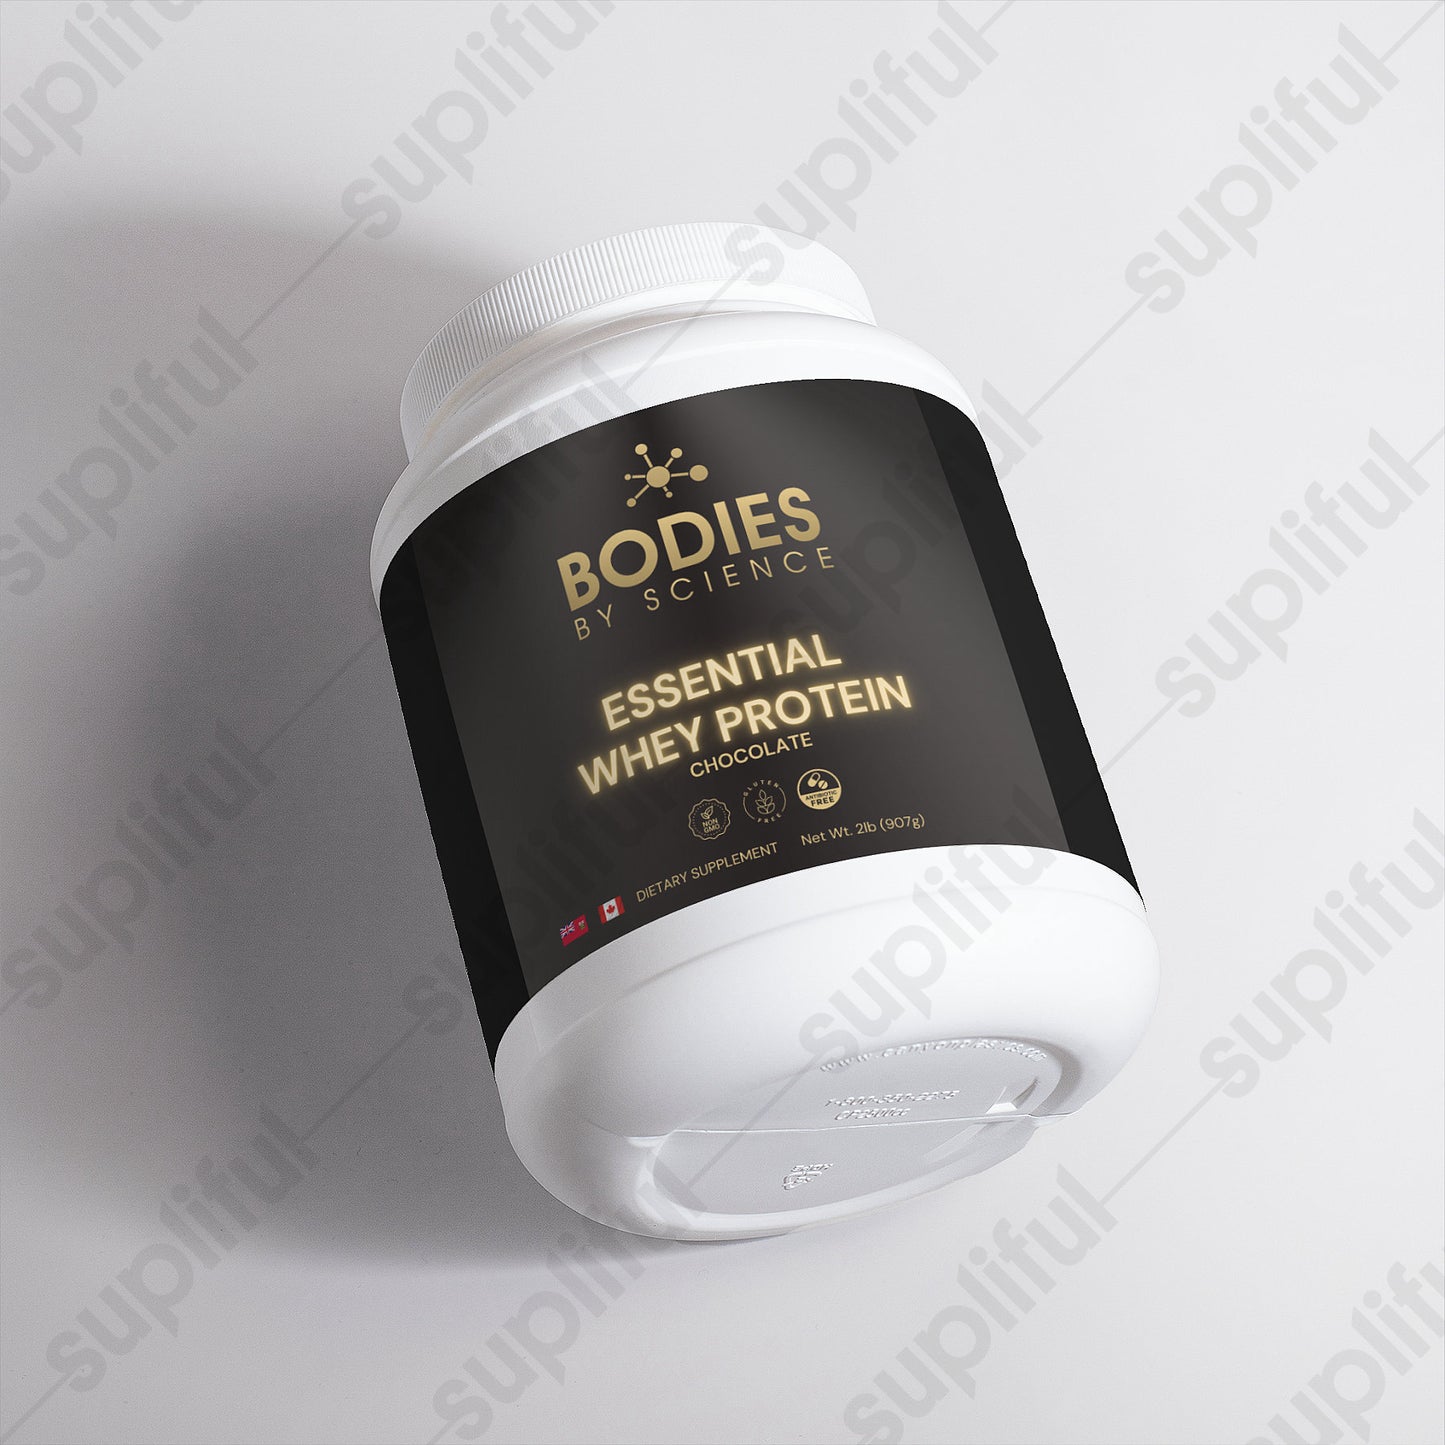 Essential Whey Protein (Chocolate Flavour)